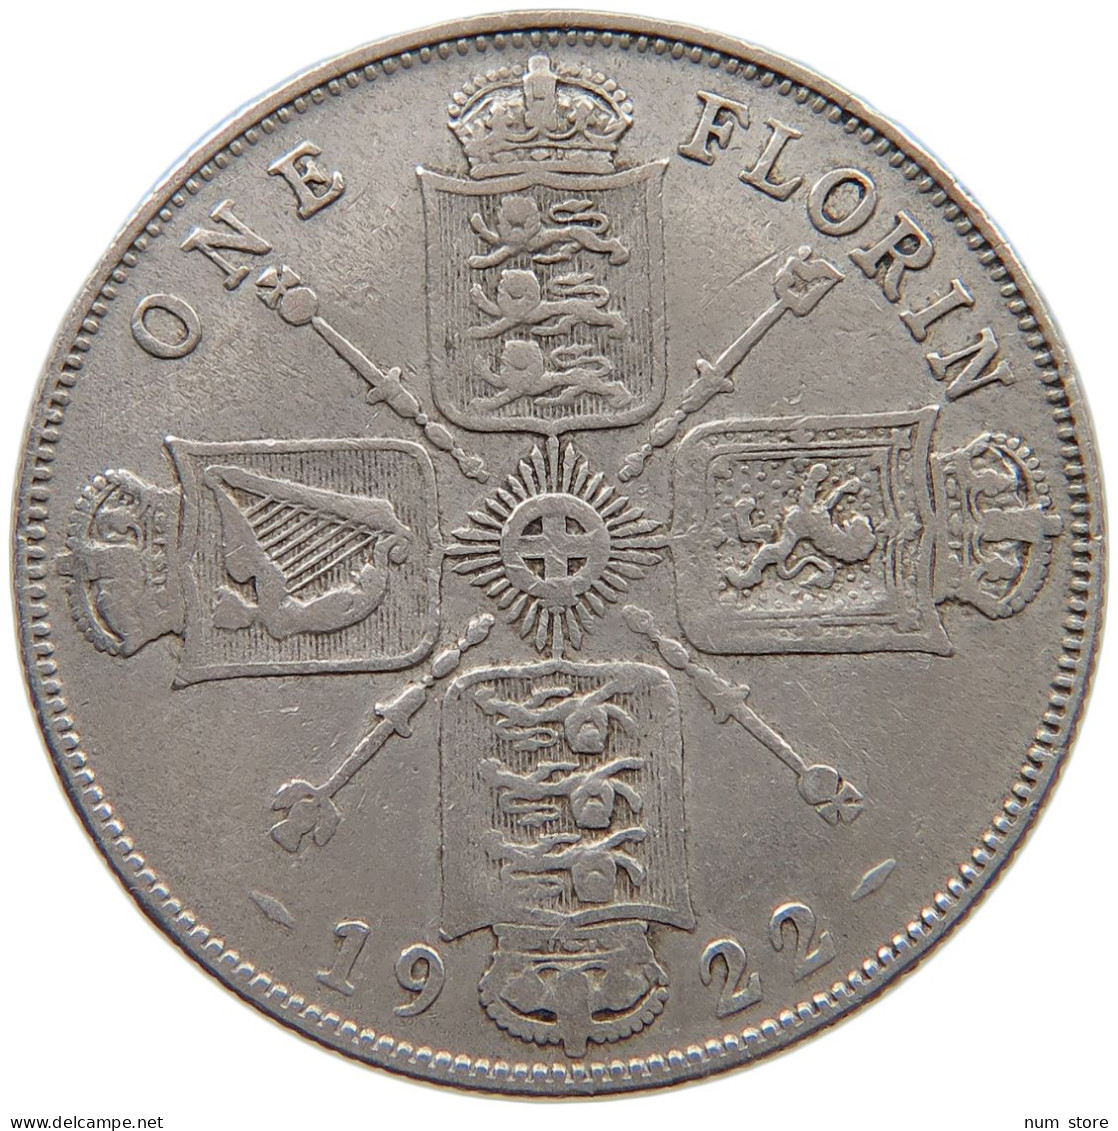 GREAT BRITAIN FLORIN 1922 George V. (1910-1936) #a073 0665 - J. 1 Florin / 2 Schillings